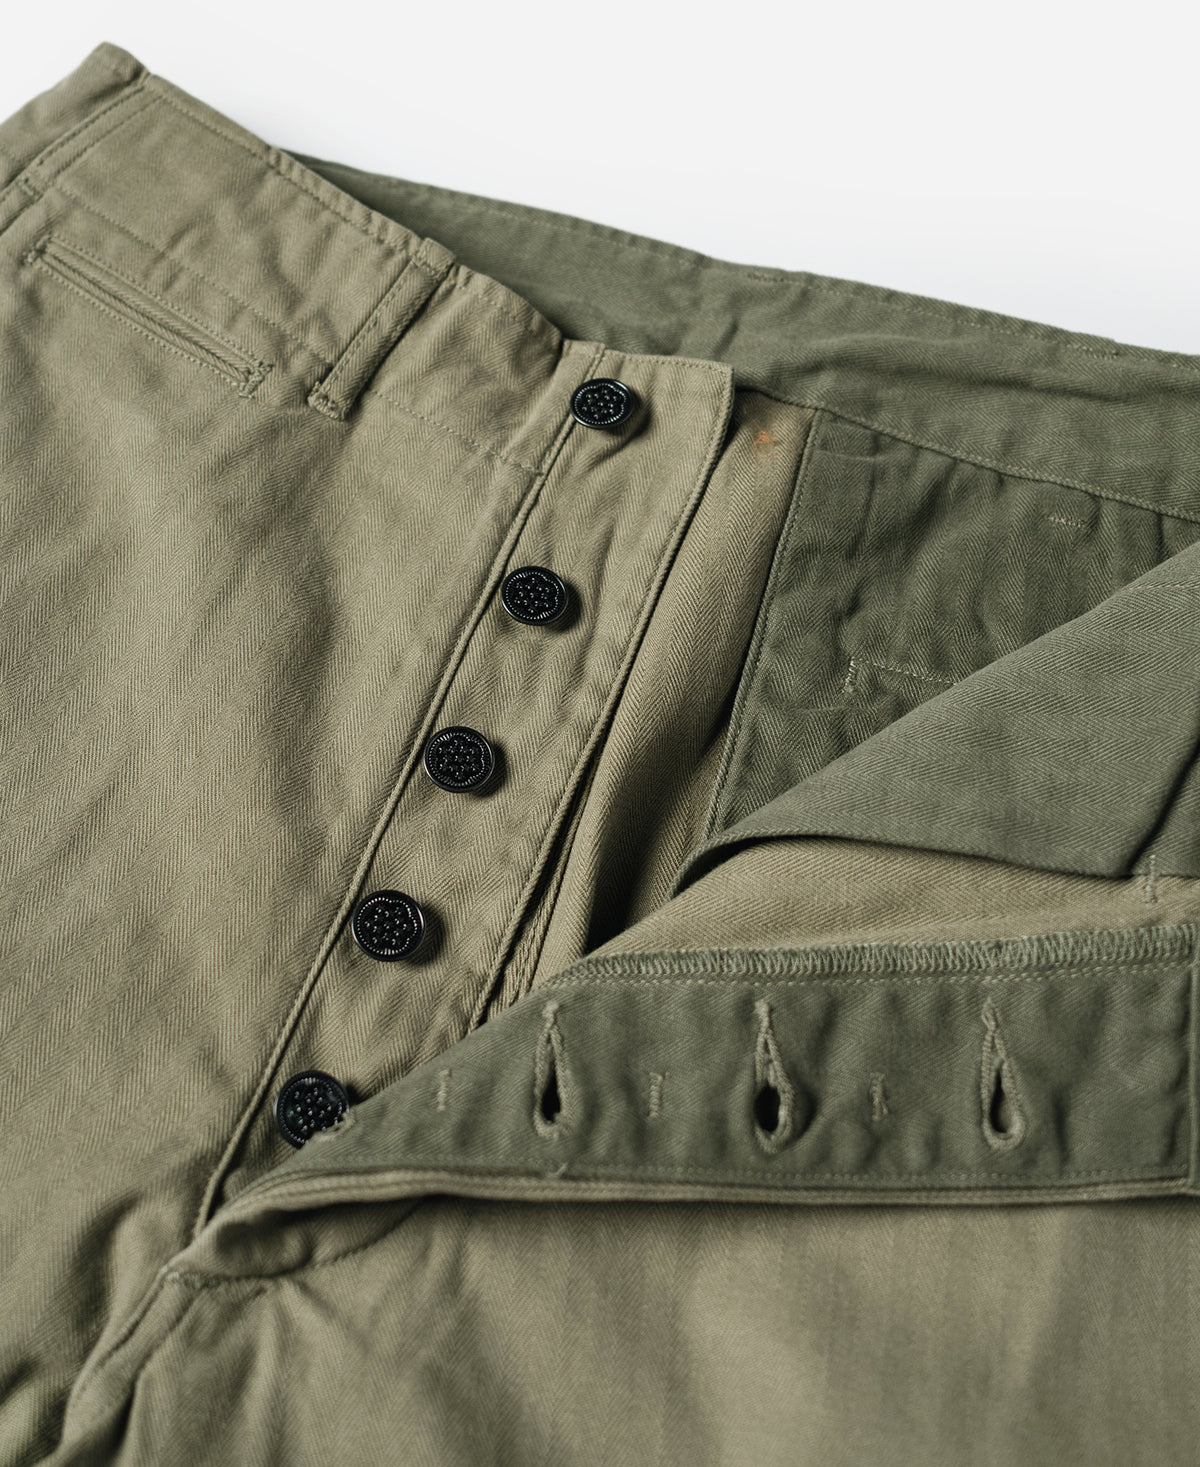 US Army M-41 HBT Fatigue Trousers